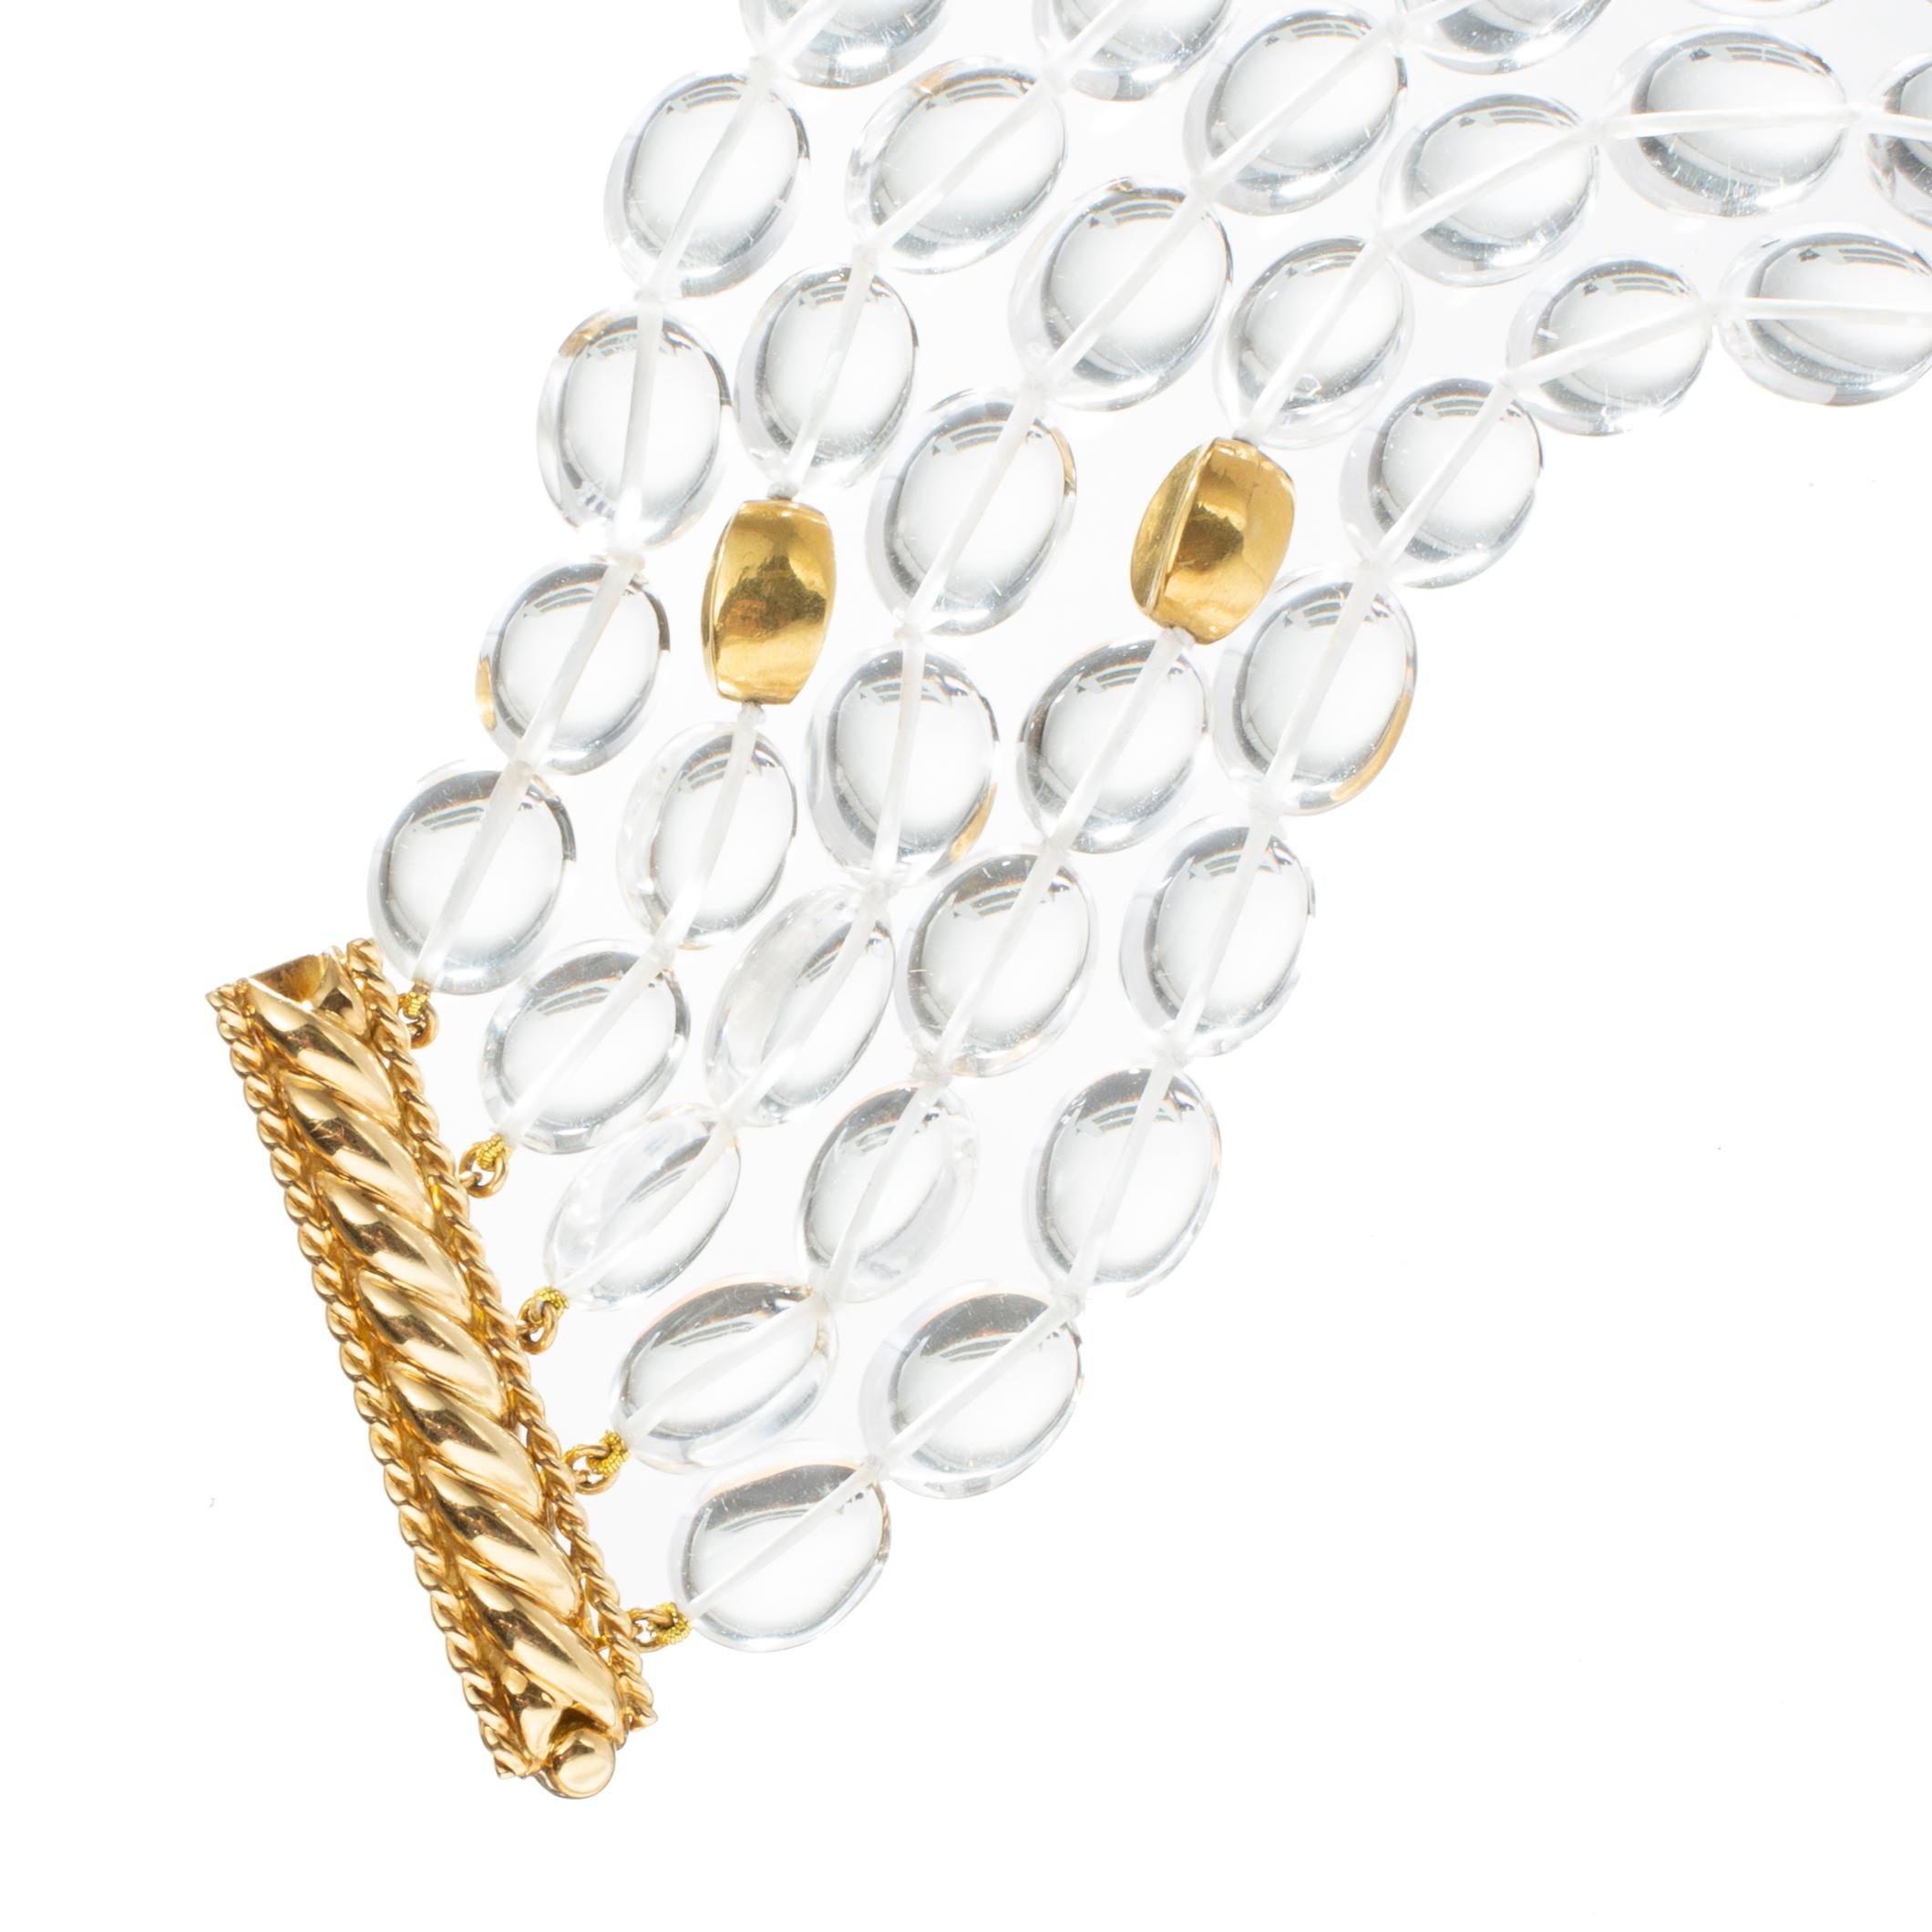 Verdura five-strand bead bracelet, featuring oval, polished, colorless, natural quartz rock crystal beads measuring 11-14 x 10-11mm each interspersed with five 18k yellow gold beads.  The 18k yellow gold elongated bar-form clasp has a rope design